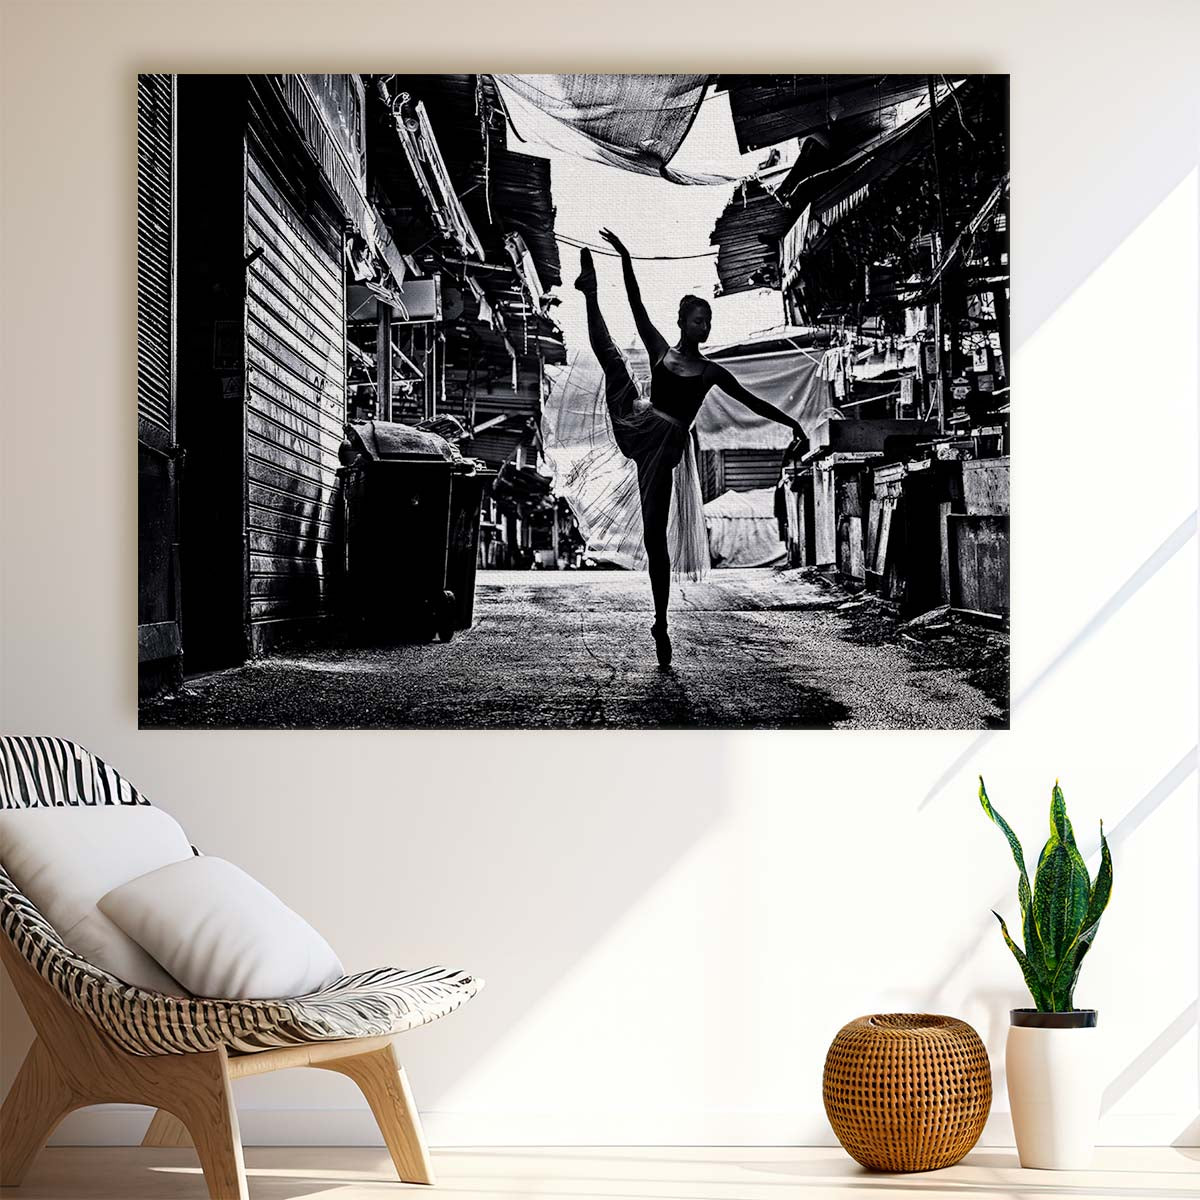 Graceful Ballerina Dancing in Monochrome Alley Wall Art by Luxuriance Designs. Made in USA.